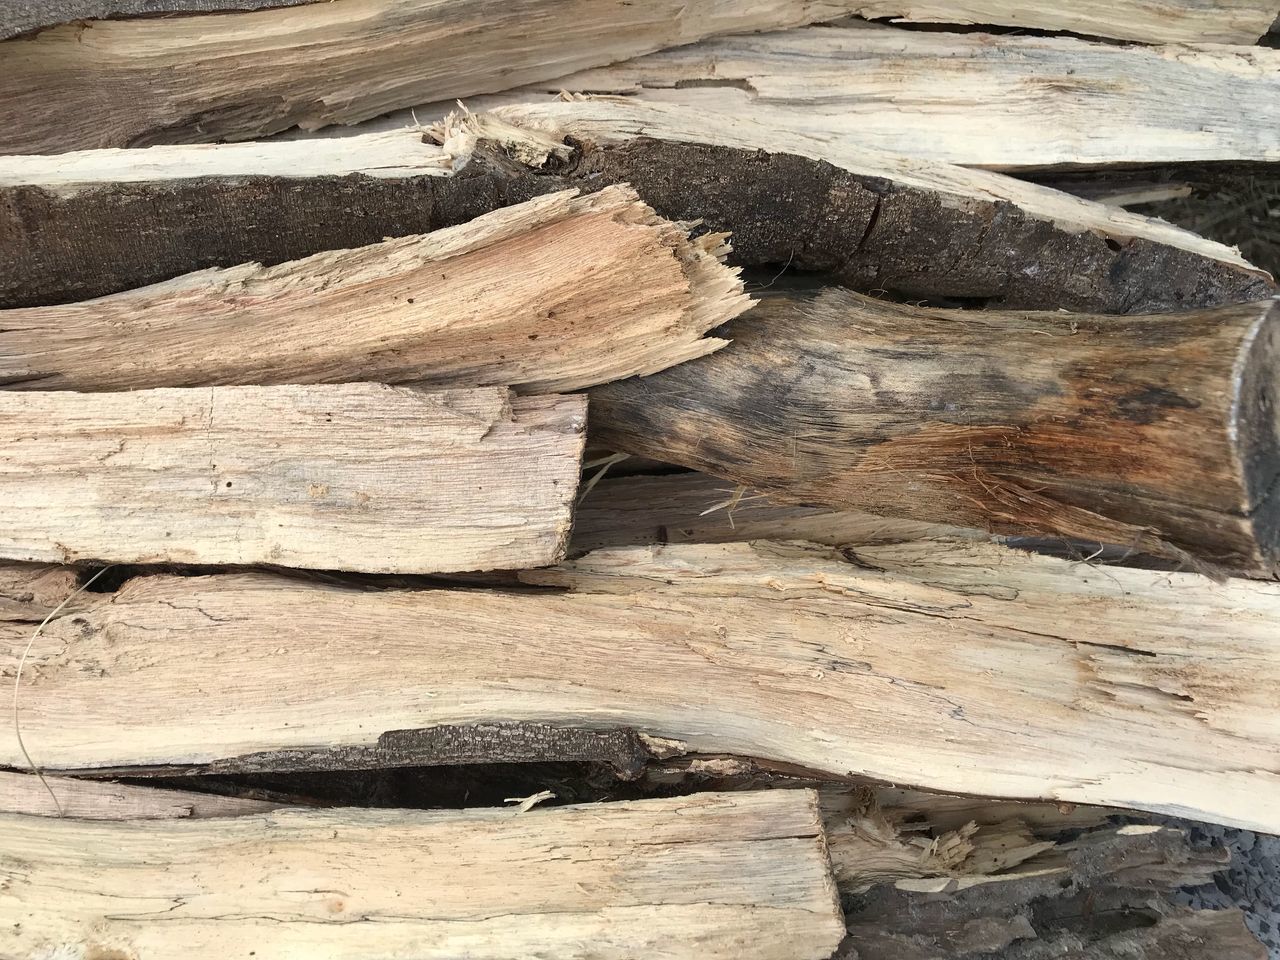 CLOSE-UP OF LOGS STACK